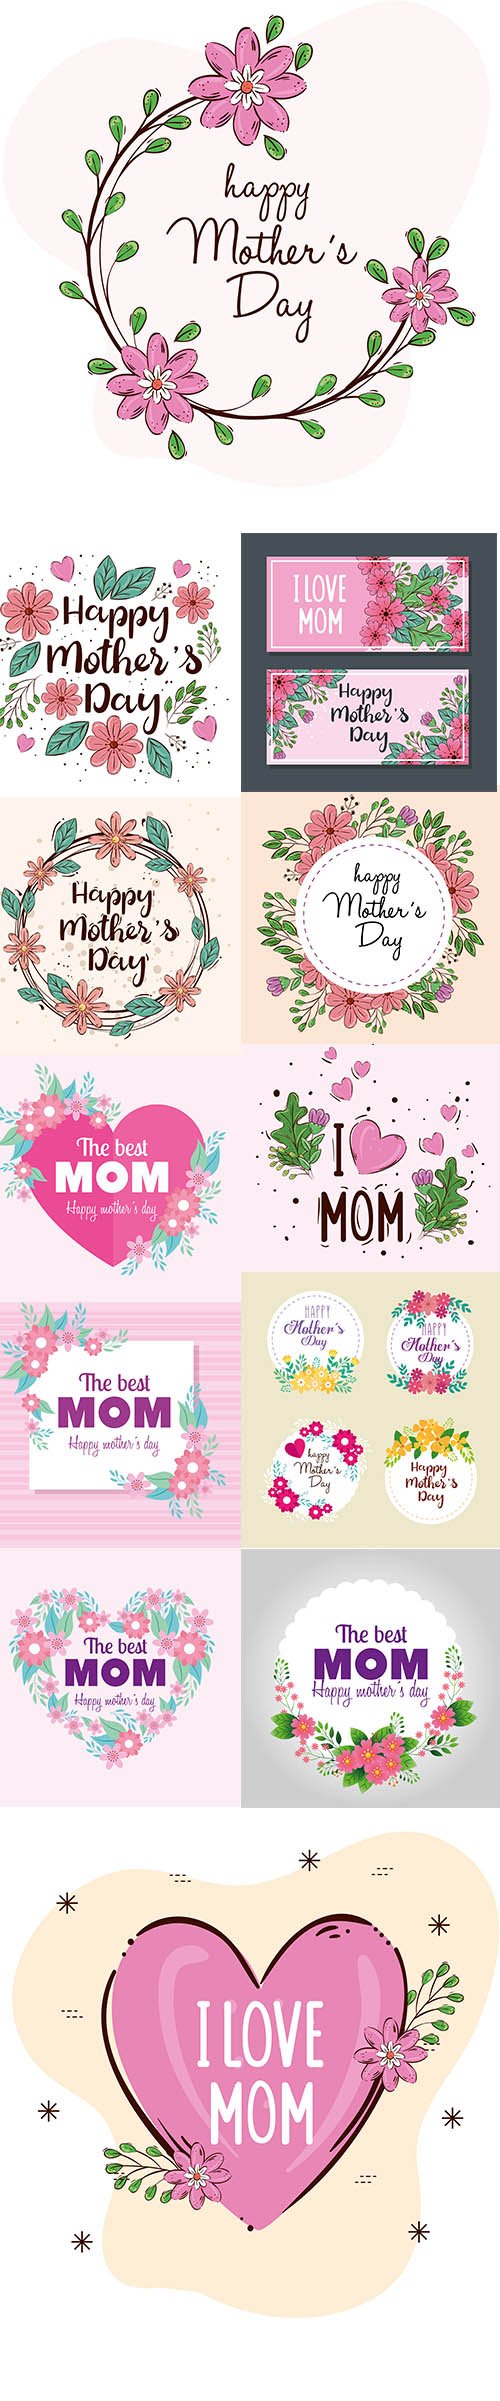 Happy Mothers Day Card with Heart Flowers